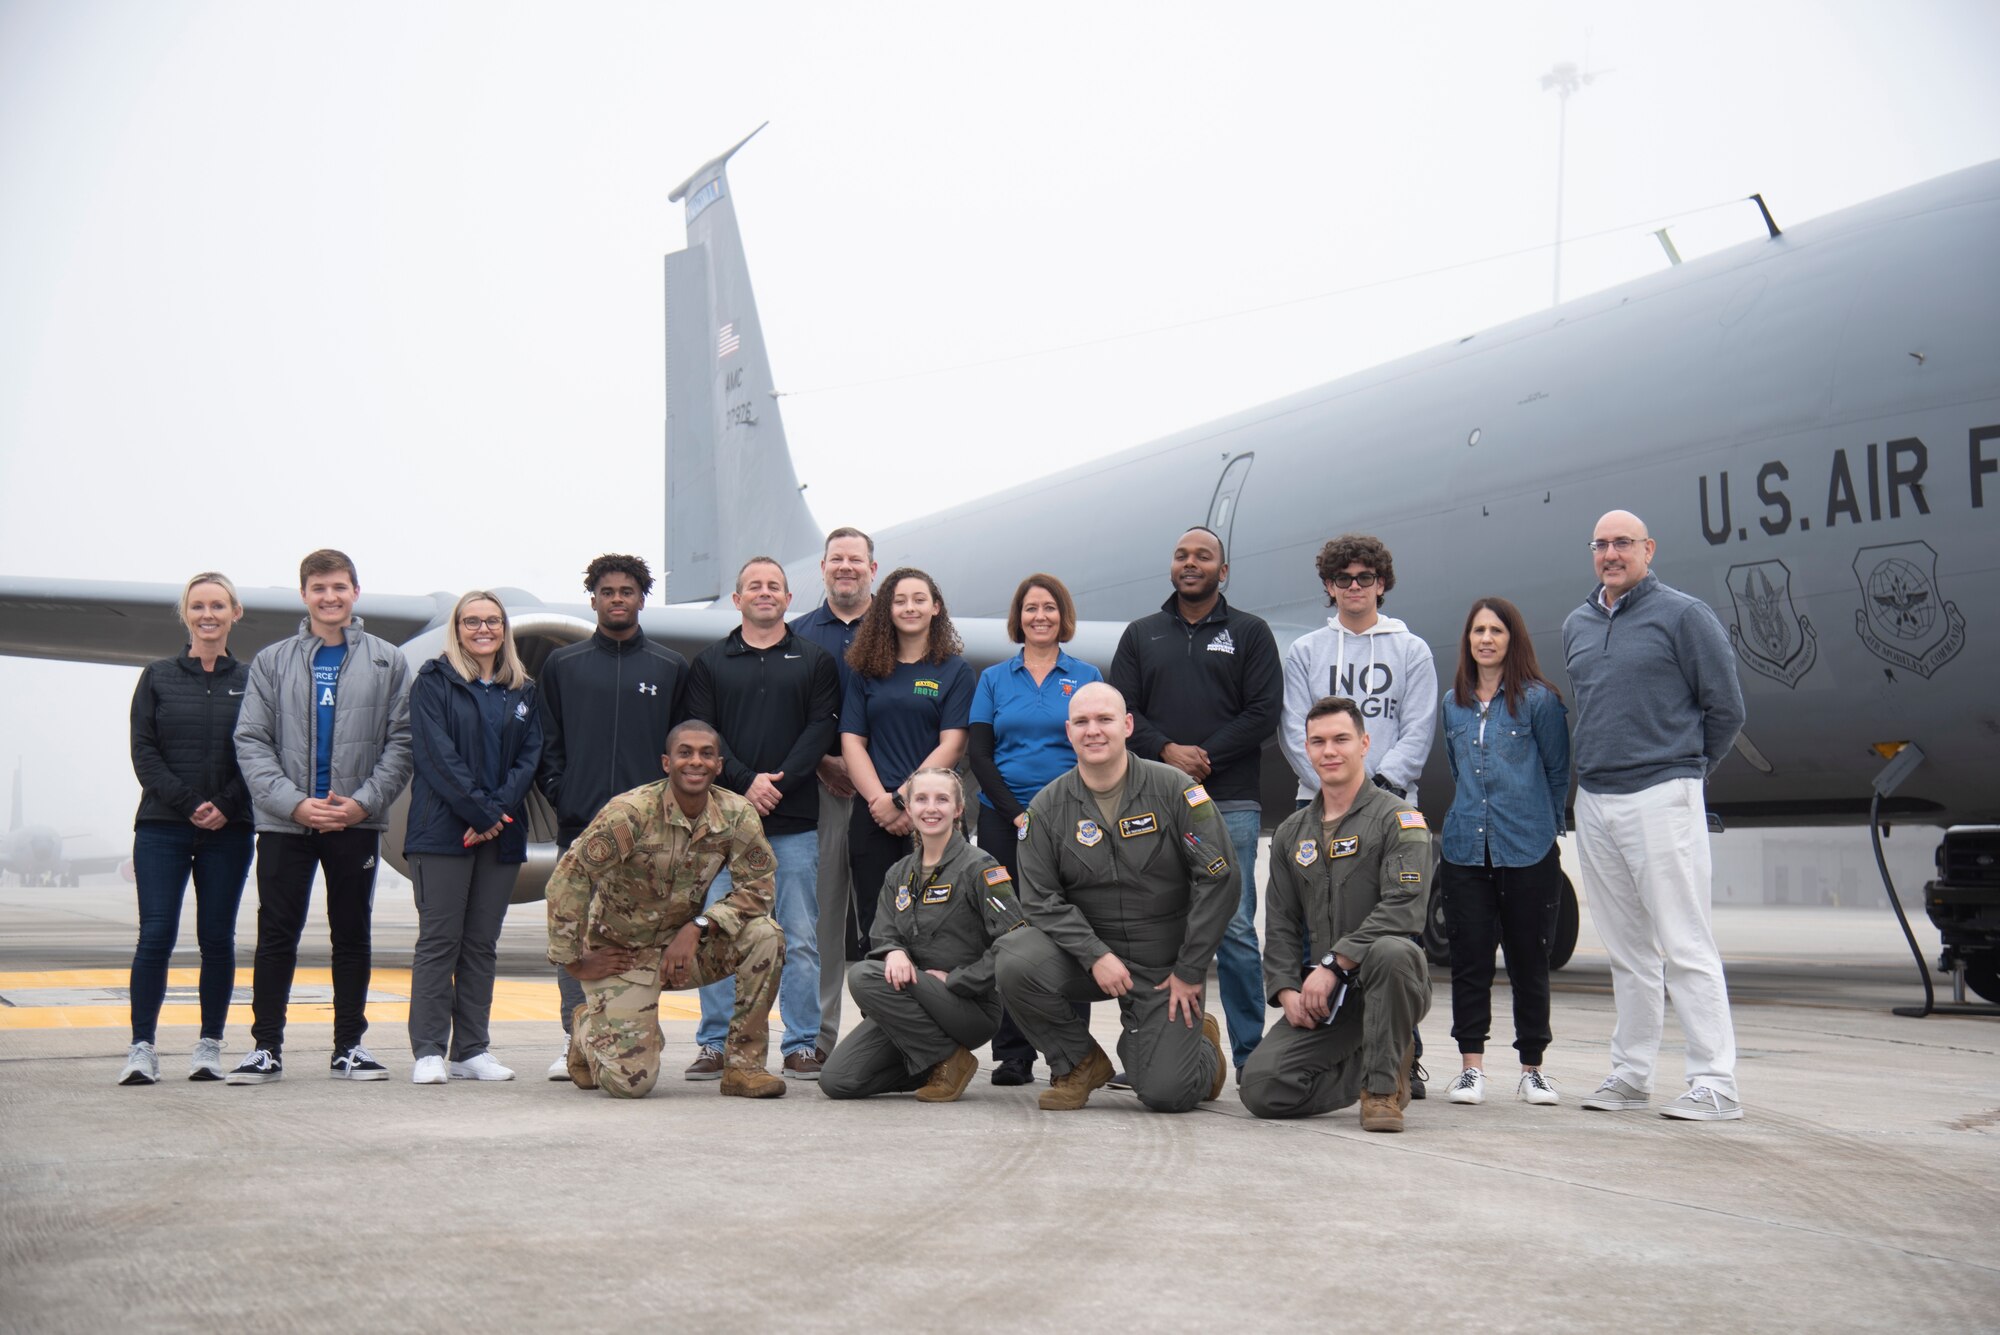 Students and administrators from the Hillsborough County School District (HCSD) pose for a photo with aircrew assigned to the 91st Air Refueling Squadron, Dec. 9, 2021, at MacDill Air Force Base, Florida.